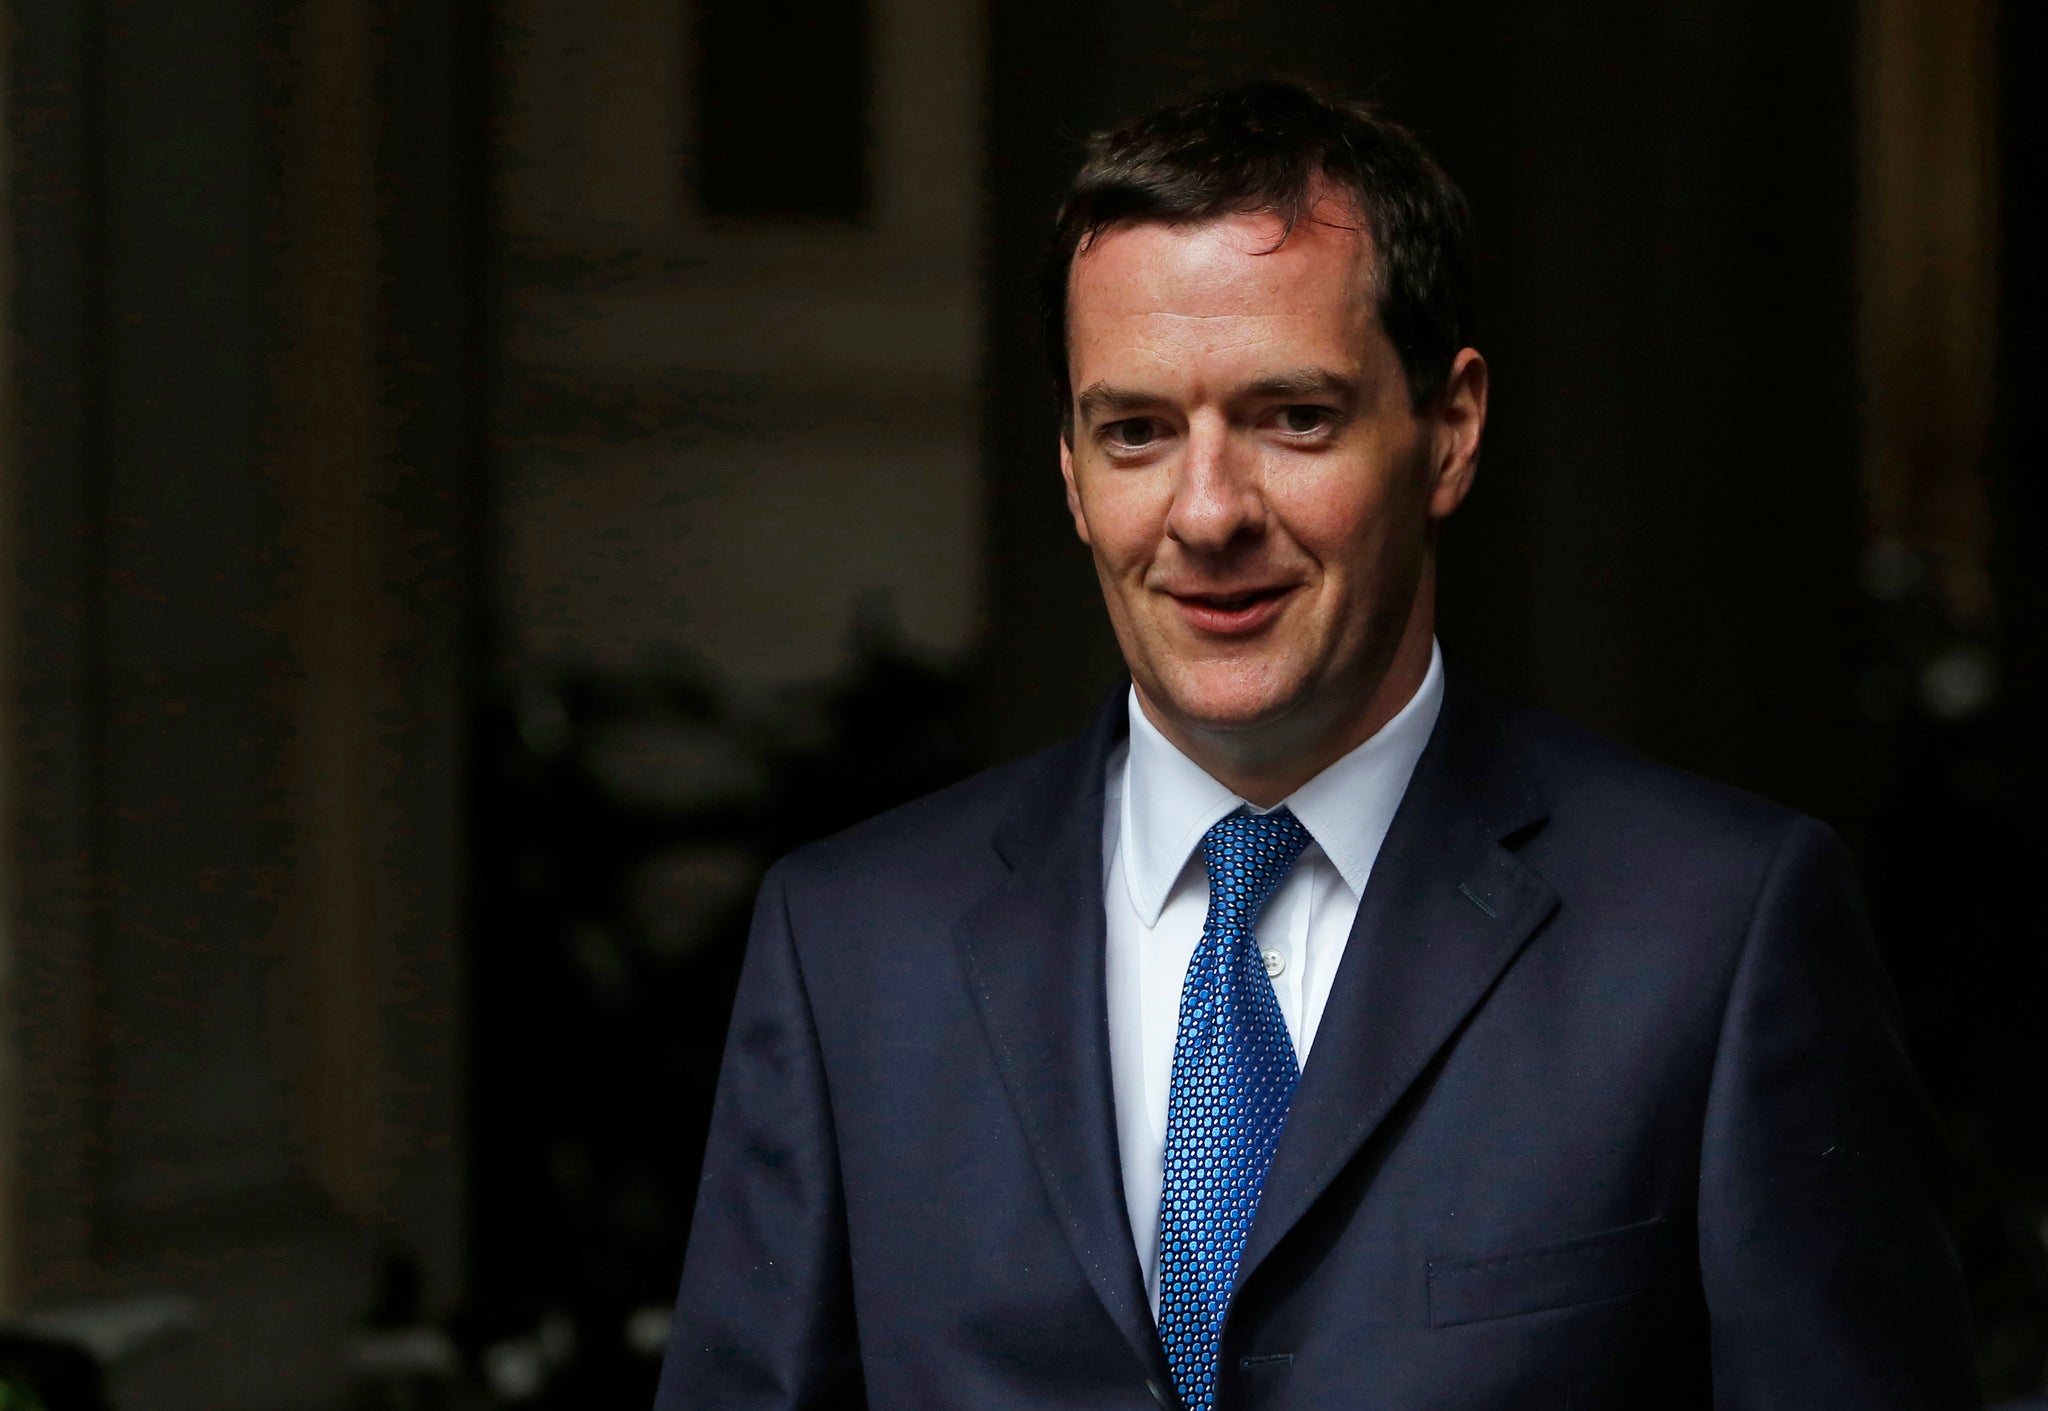 George Osborne has been voted the most influential Londoner, ahead of Boris Johnson and David Cameron